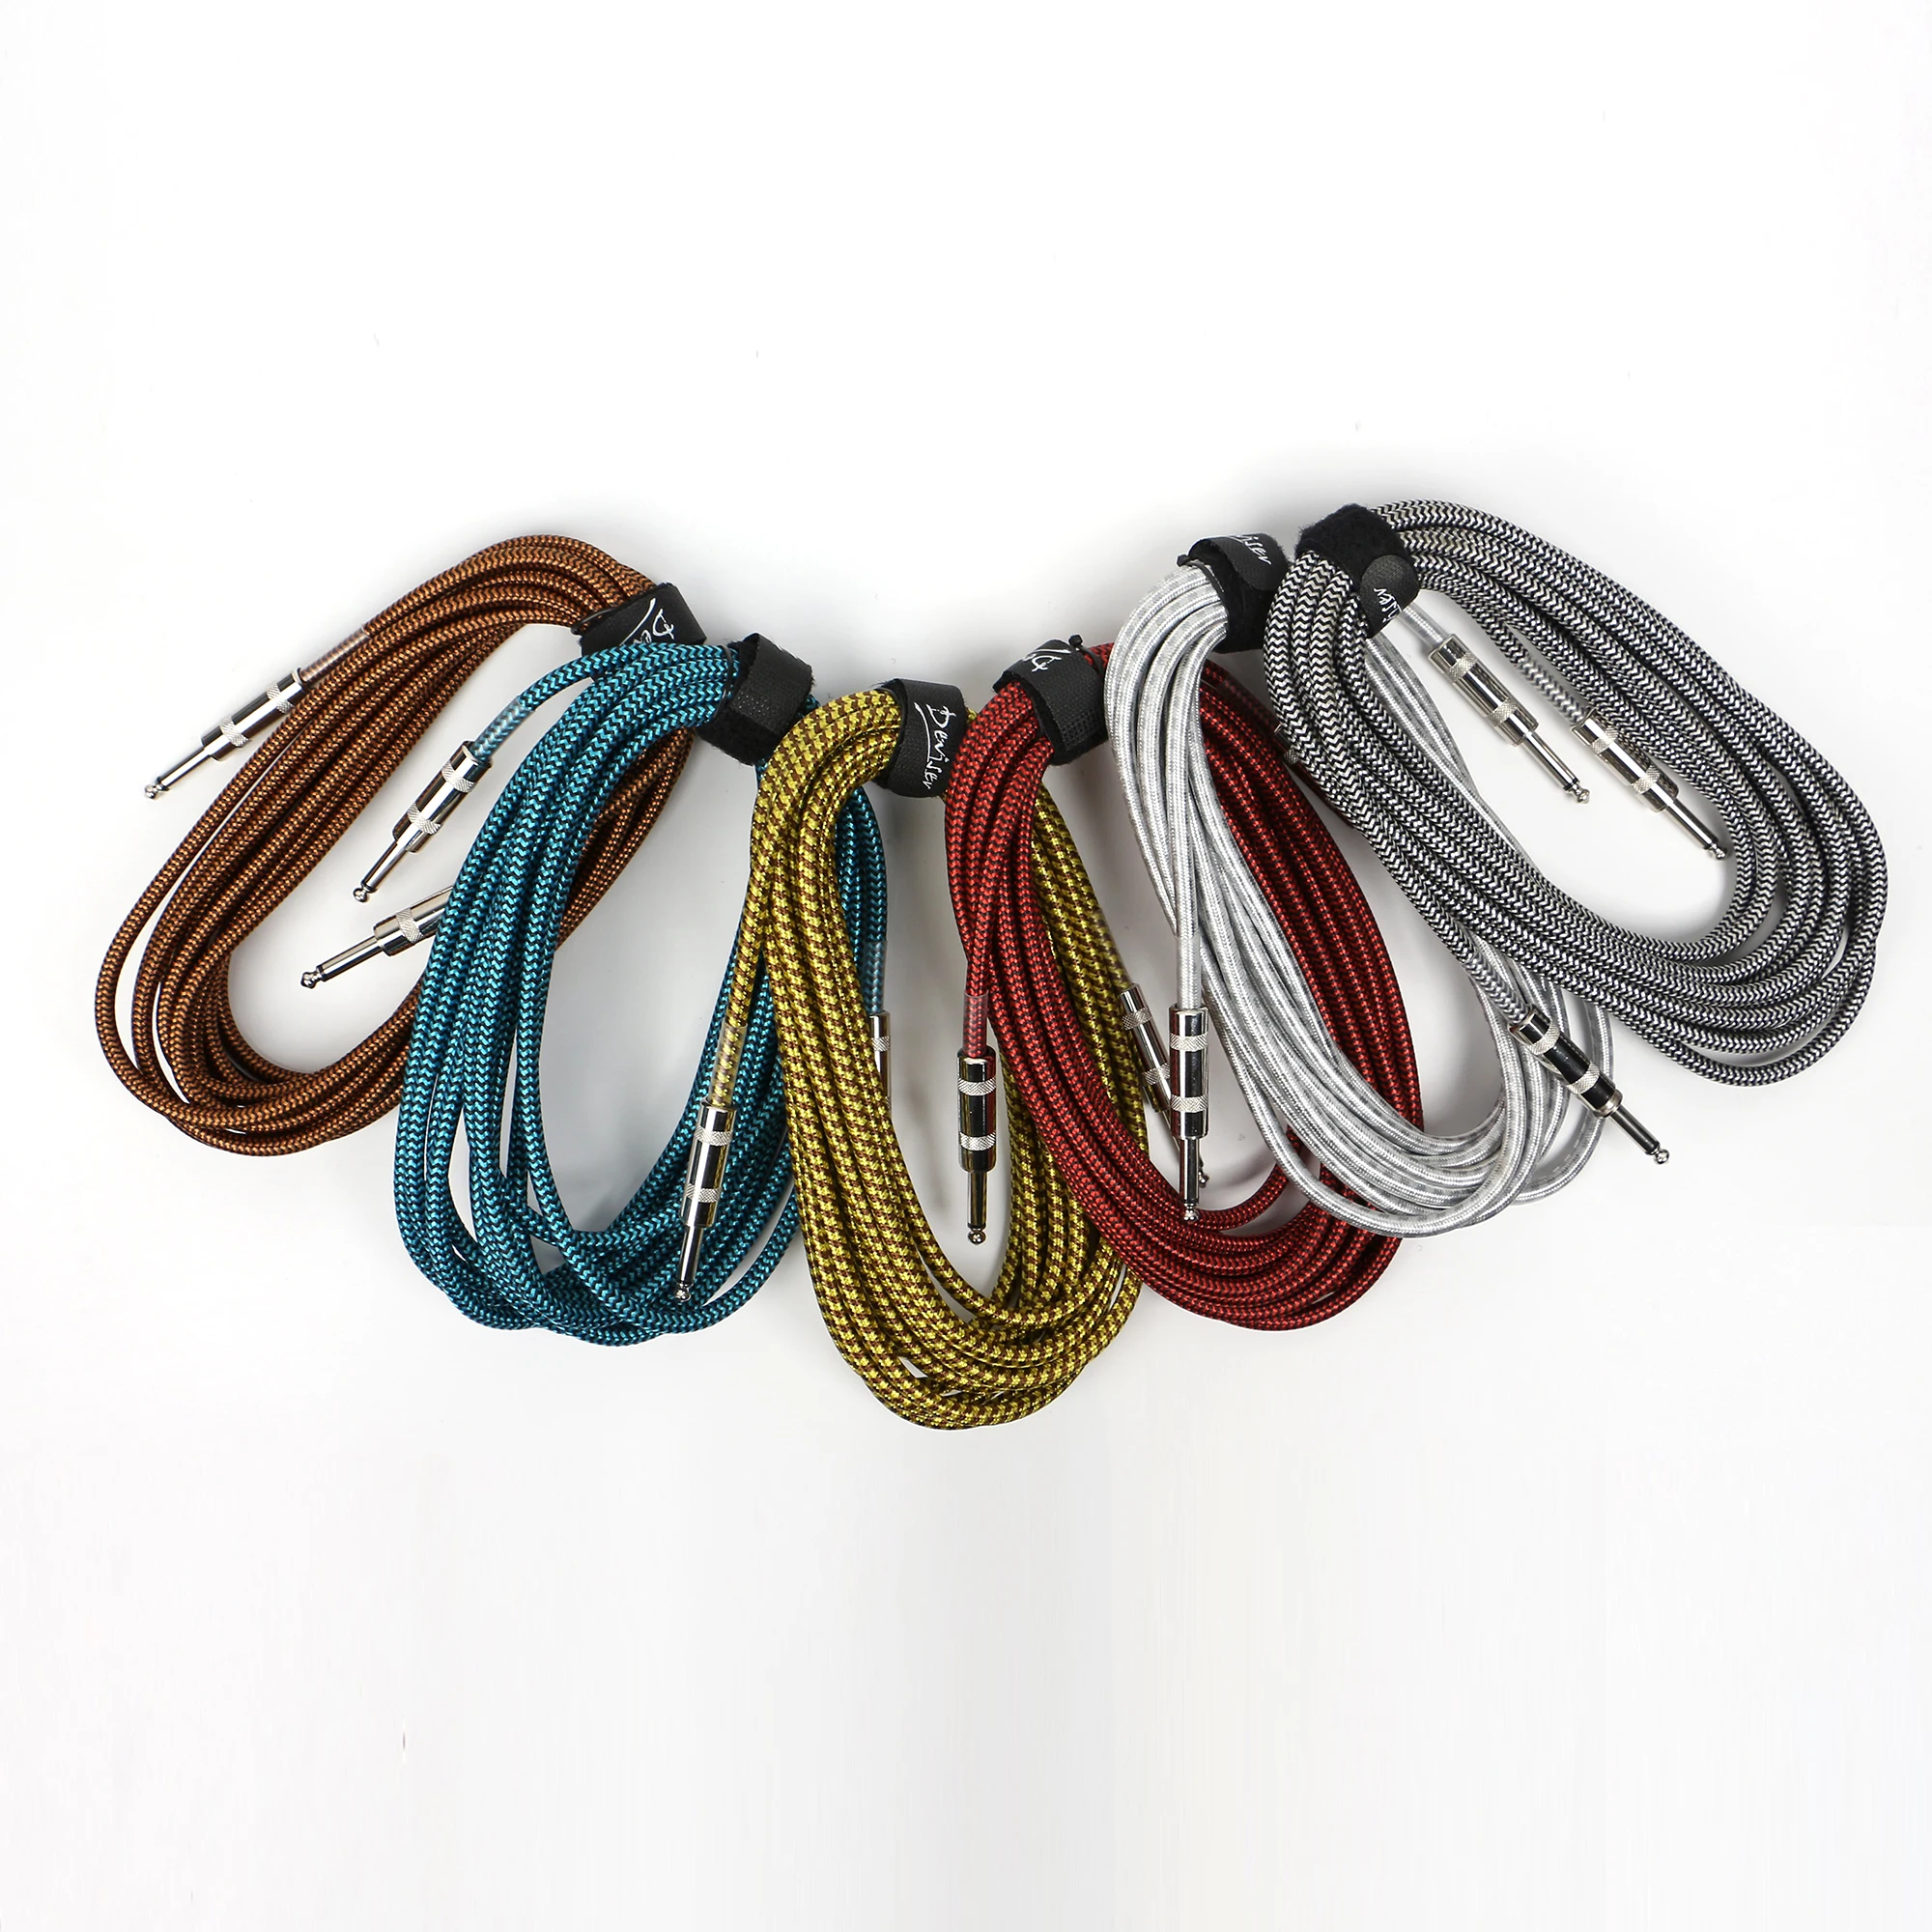 bede På forhånd Indflydelse Flexible Guitar Cable Guitar Accessories Wholesale From China - Buy  Flexible Gutiar Cable,Guitar Accessories,Gutiar Cable Product on Alibaba.com